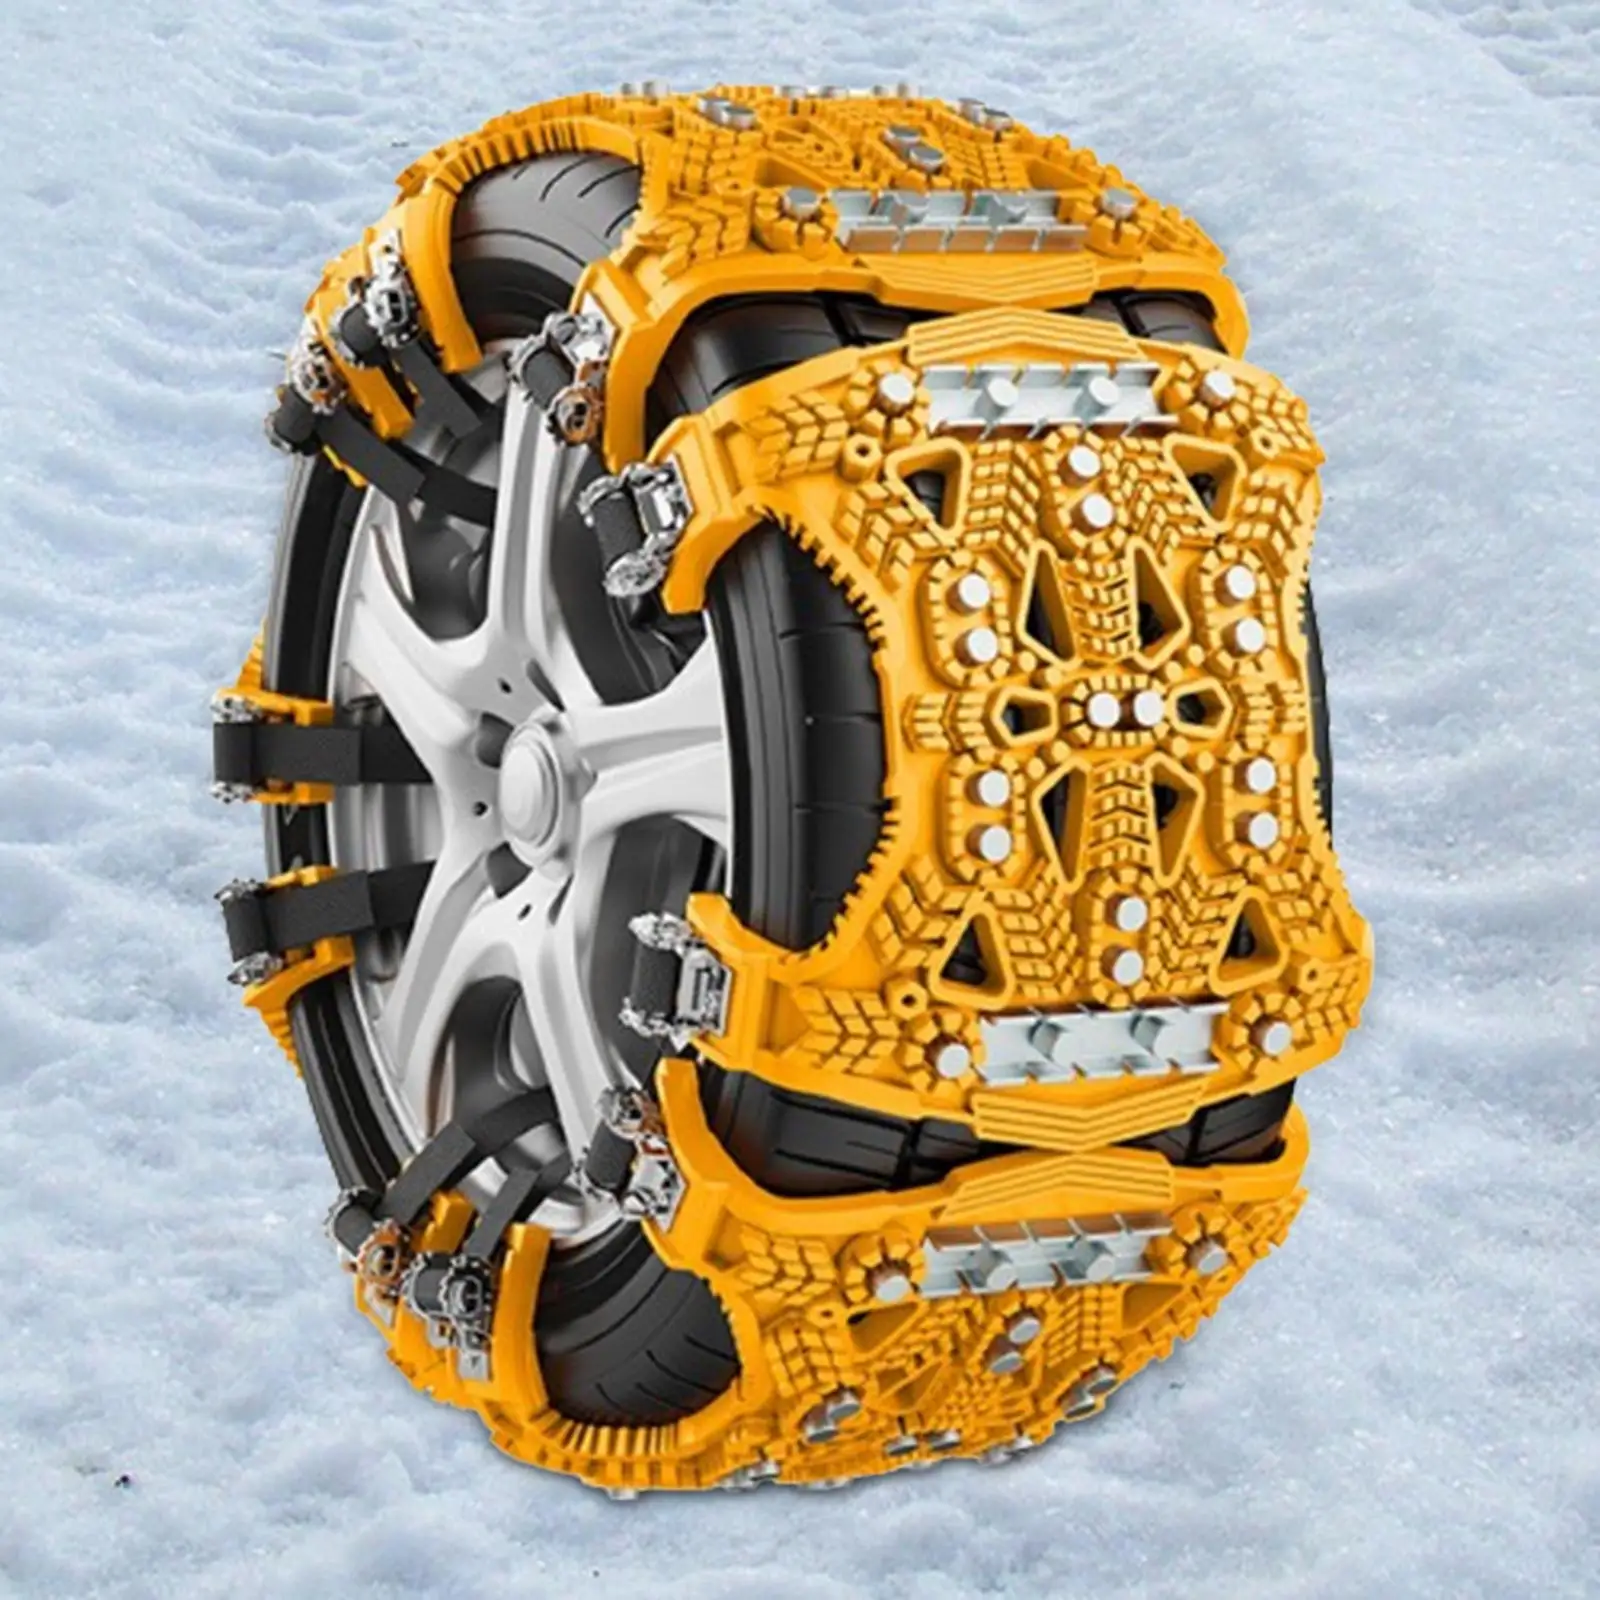 Vehicle Car Tyres Anti Slip Snow Chain Easily Mount Winter Security Chain